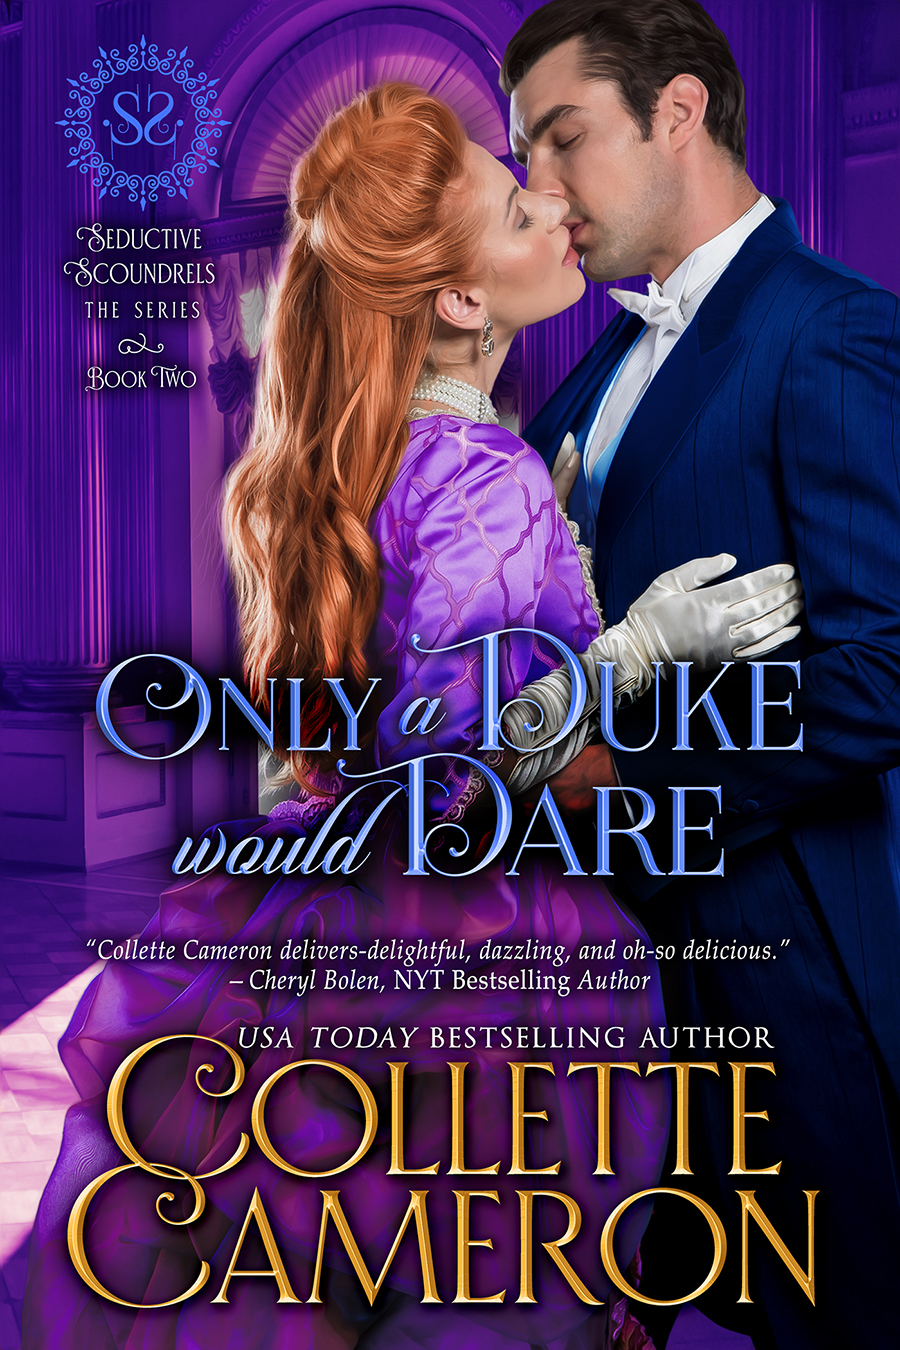 Only a Duke Would Dare is 99¢!